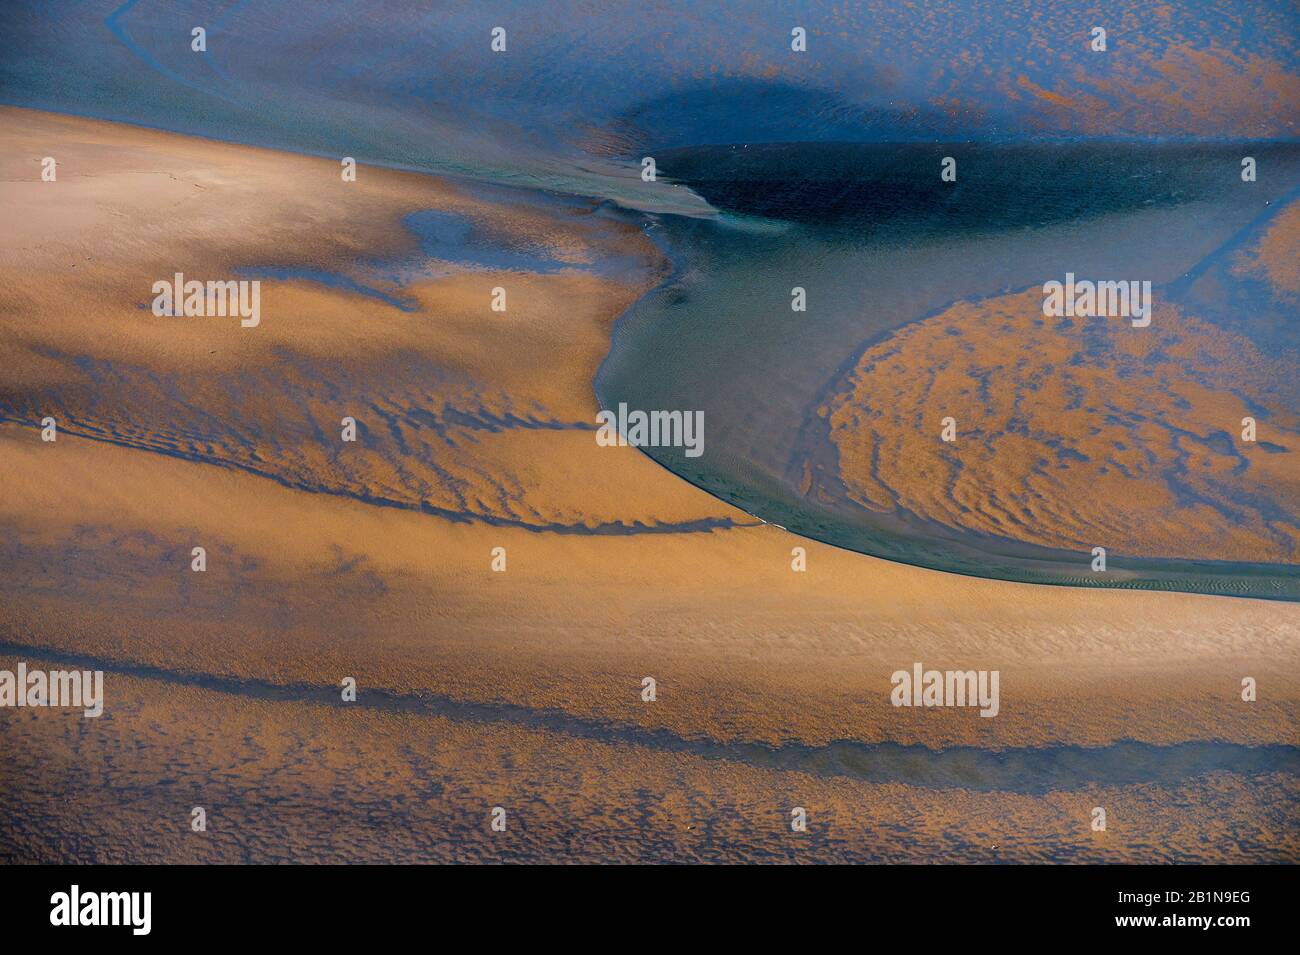 aerial view of the wadden sea, Germany, Schleswig-Holstein, Schleswig-Holstein Wadden Sea National Park Stock Photo